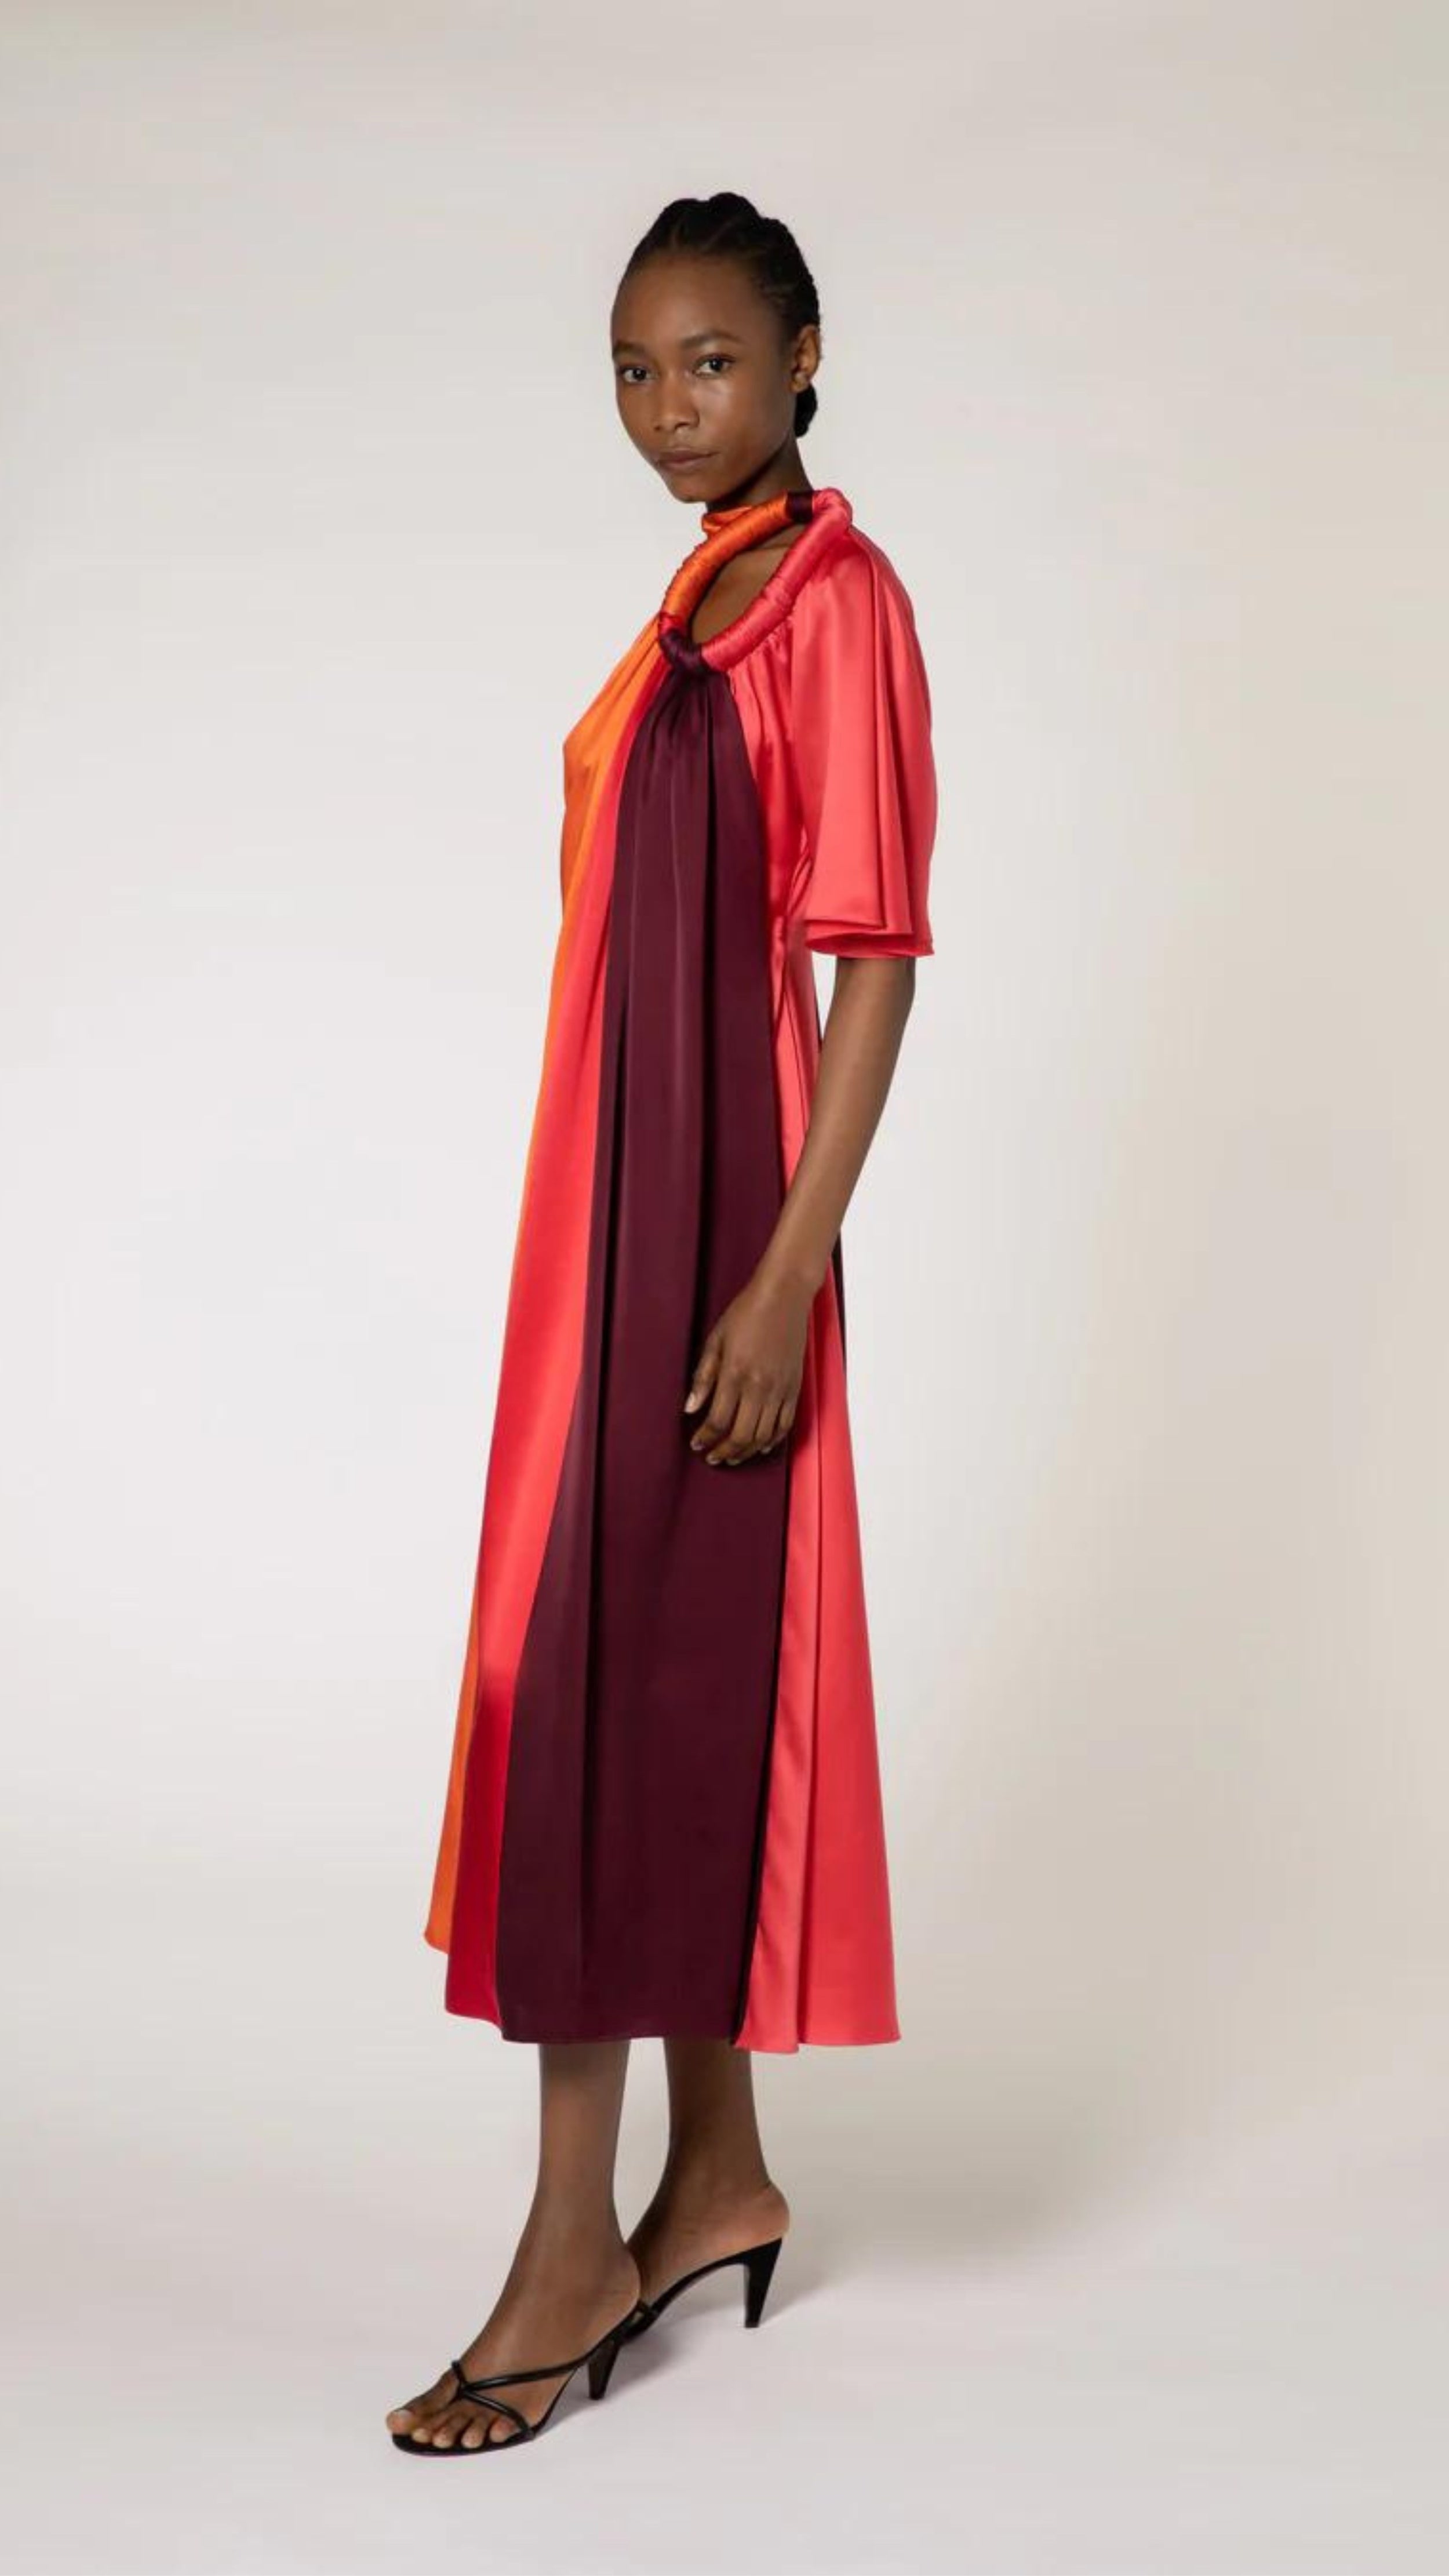 Roksanda Fiamma Dress. Silk midi dress in vertical panels of orange, rose red and burgundy. Features an architectural oval cut out at the top right front. Shown on model facing side.